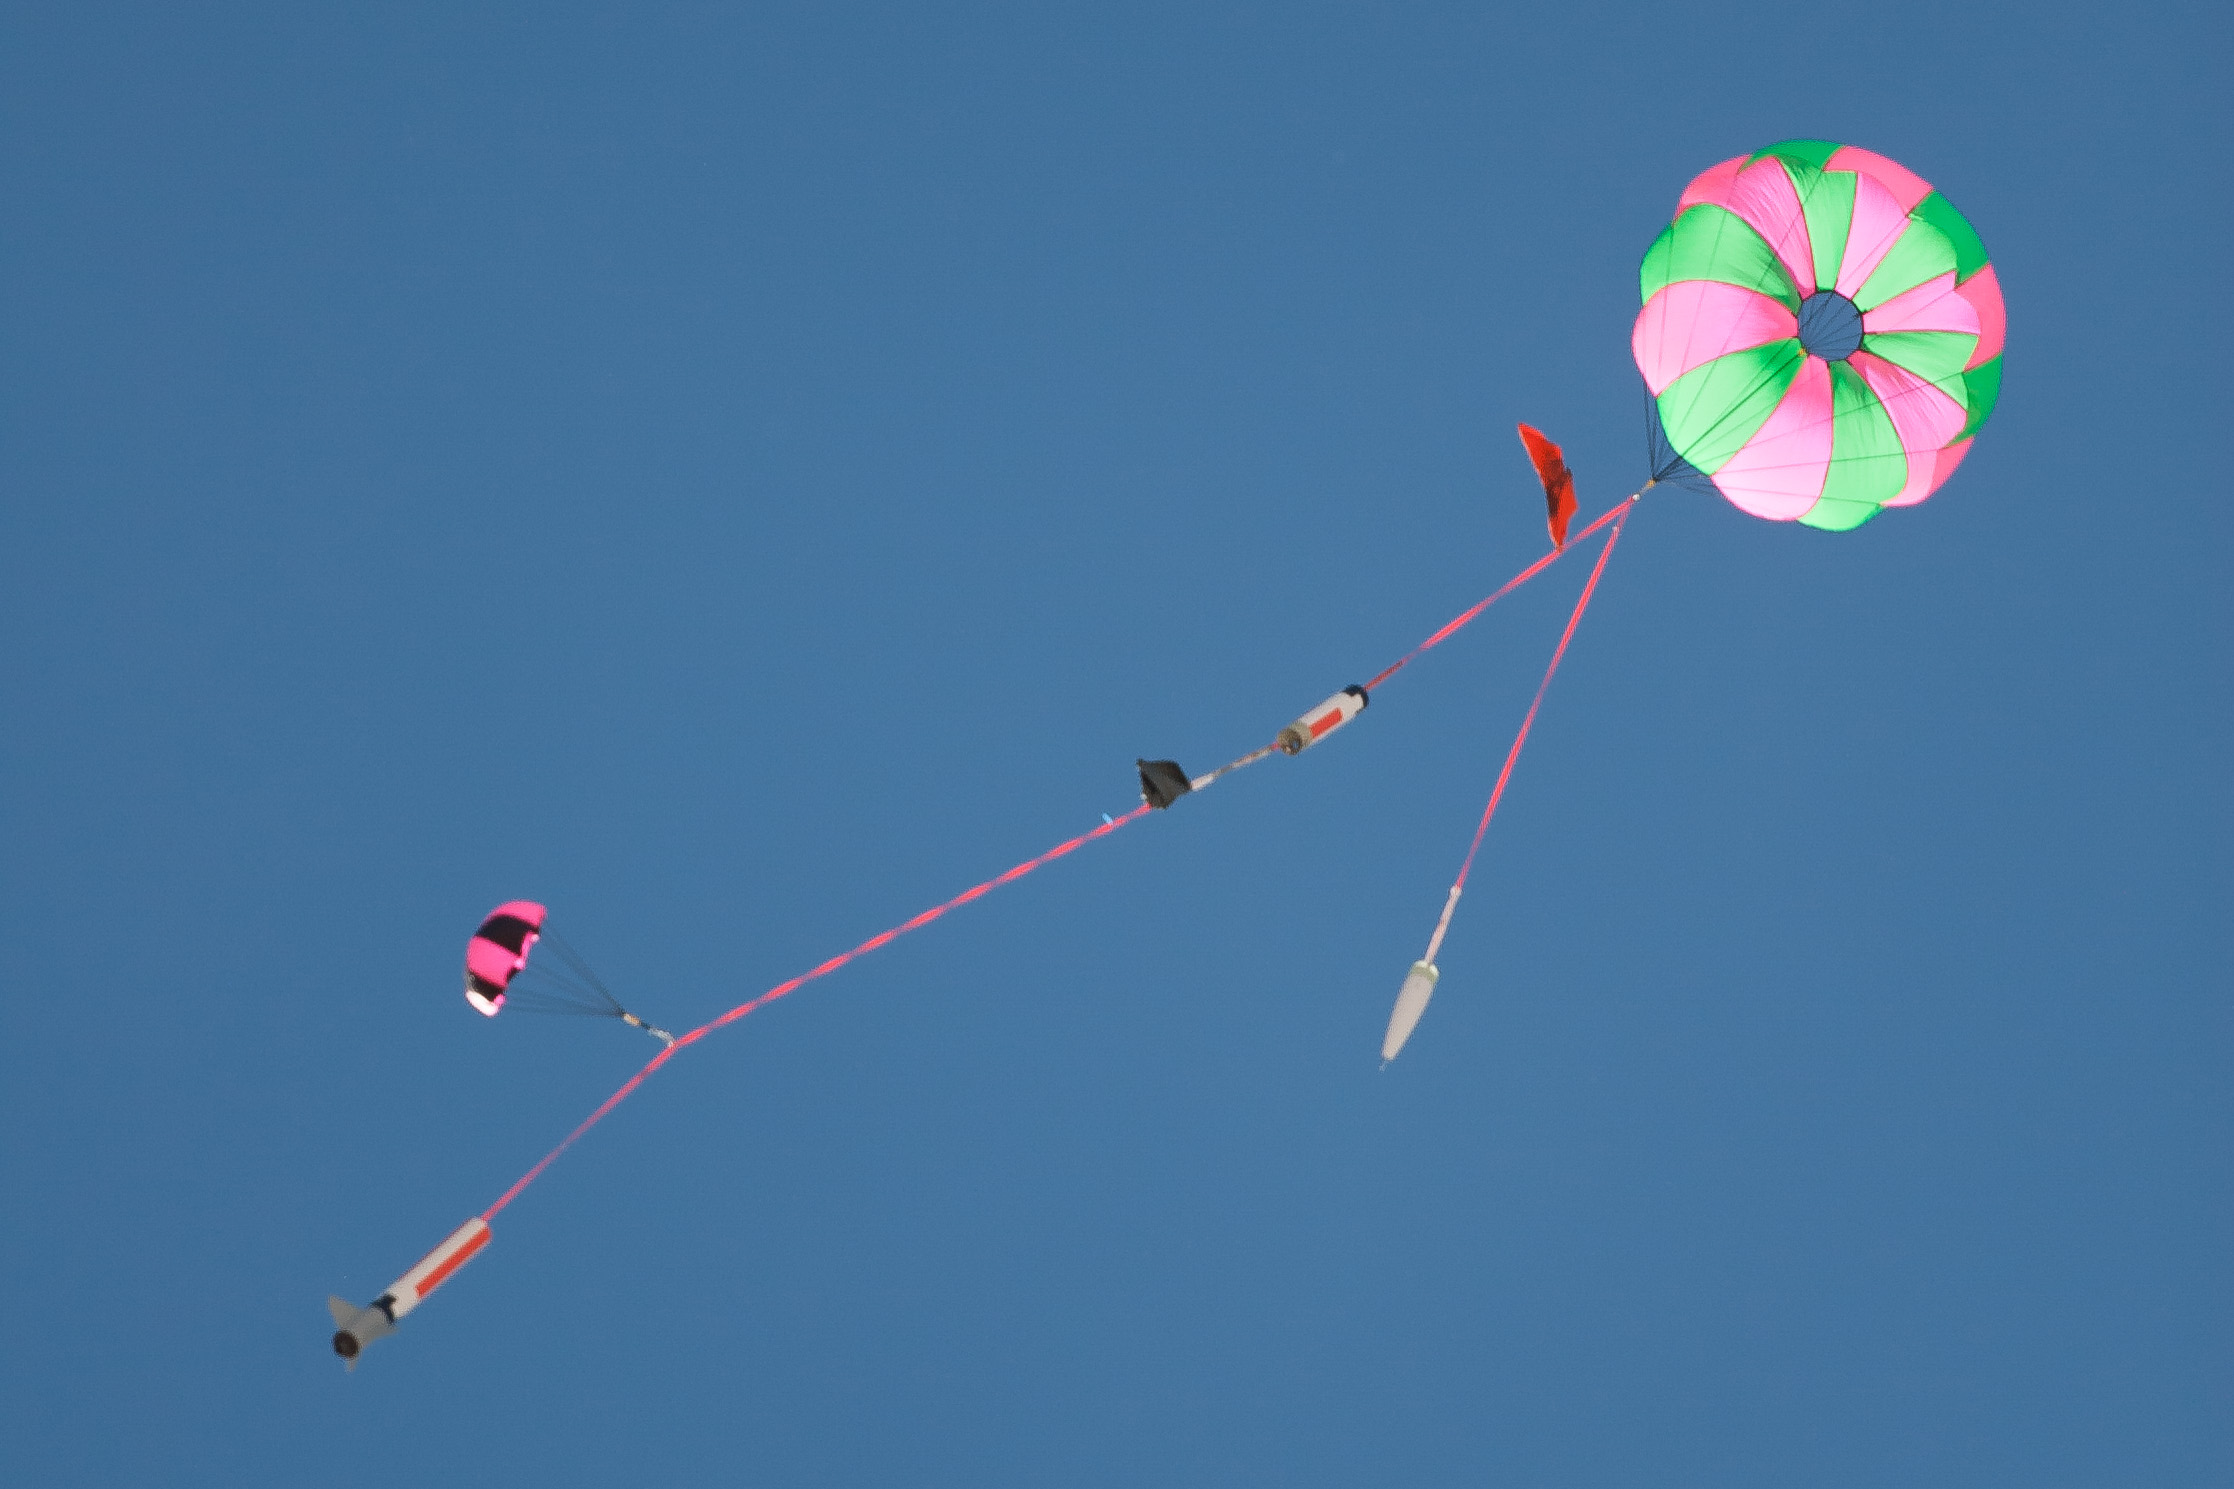 a kite being flown upside down on a clear day